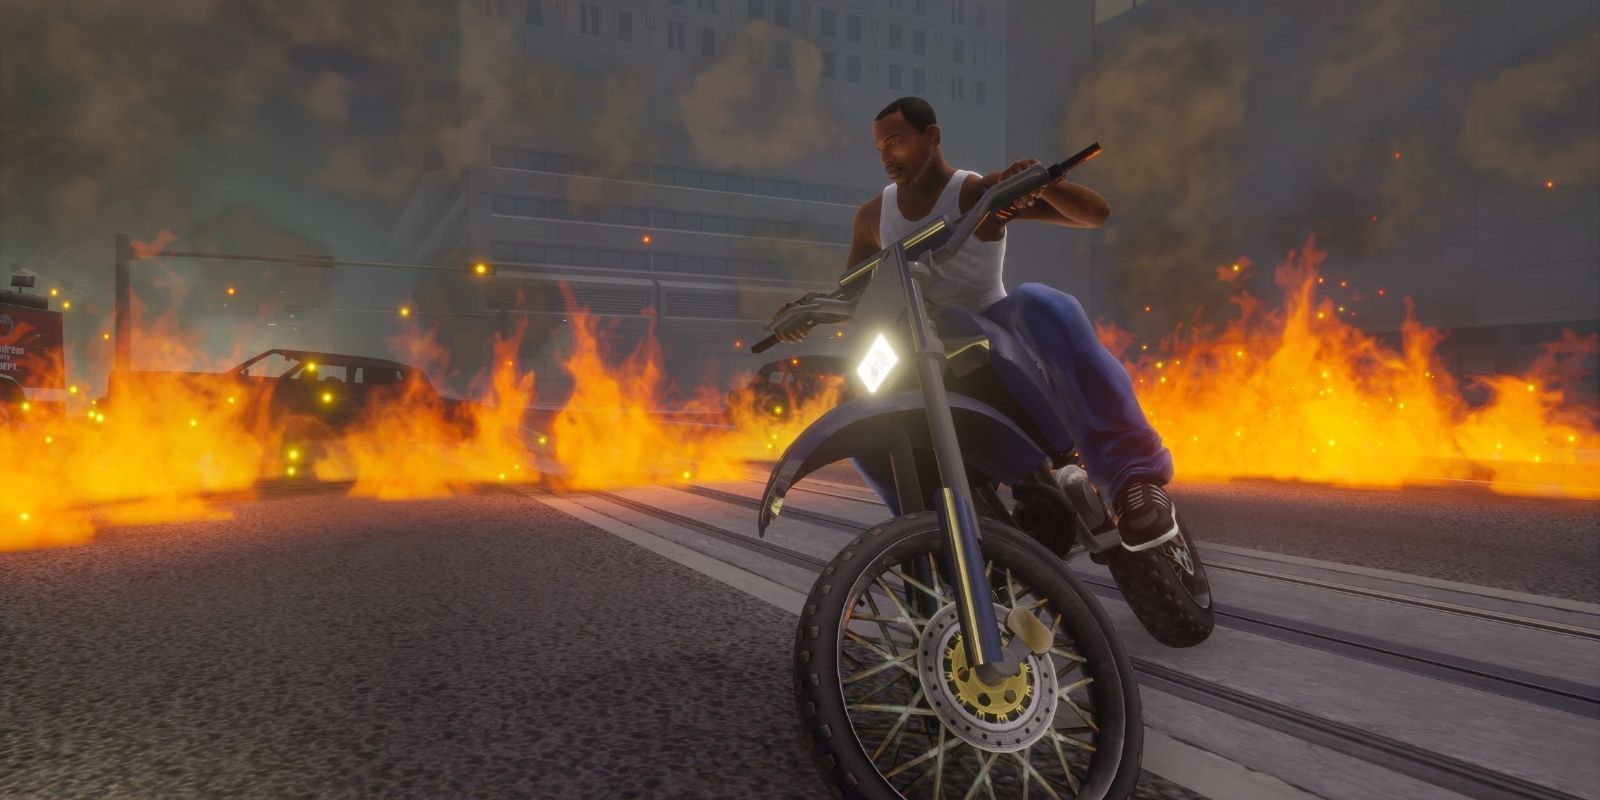 GTA: San Andreas Gets The Dreaded AO Rating, Today in Video Game History  (July 20th)